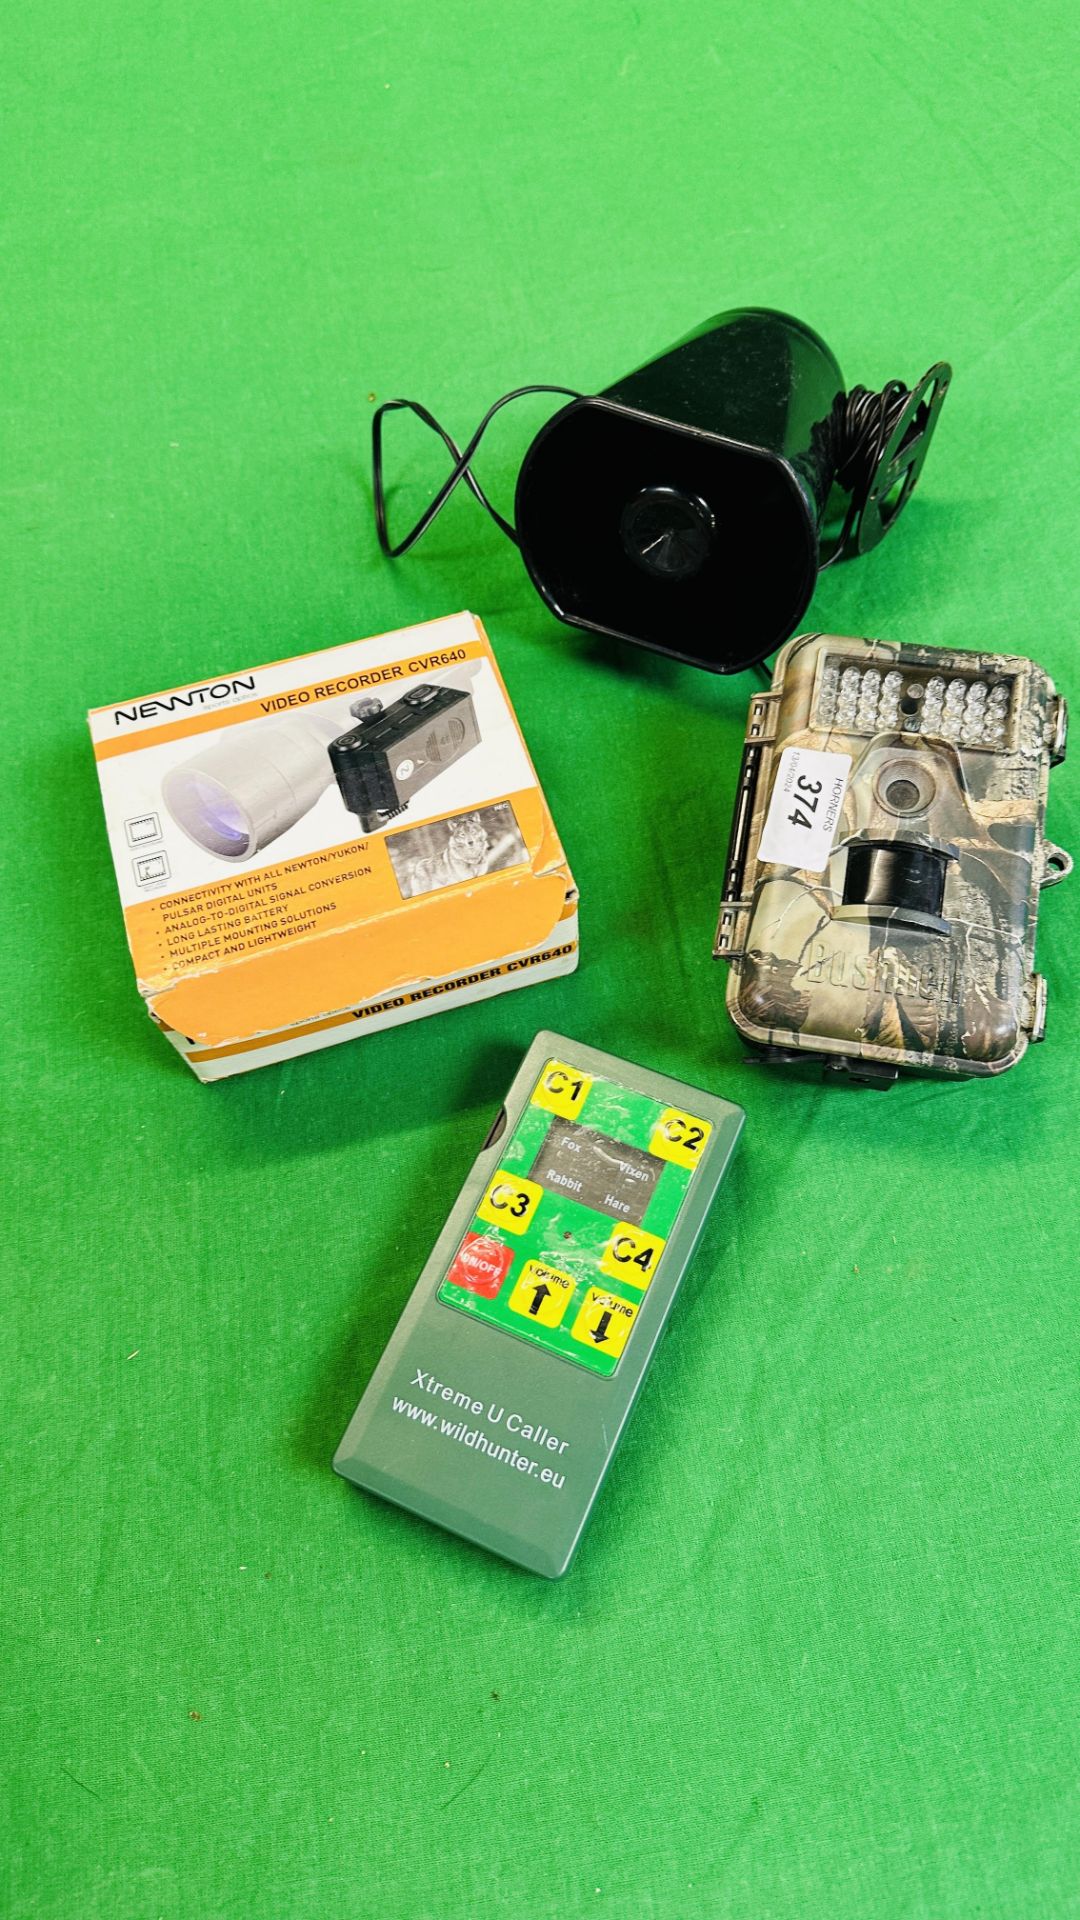 A BUSHNELL CAMOUFLAGE MOTION SENSOR WILDLIFE CAMERA ALONG WITH AN EXTREME U CALLER,